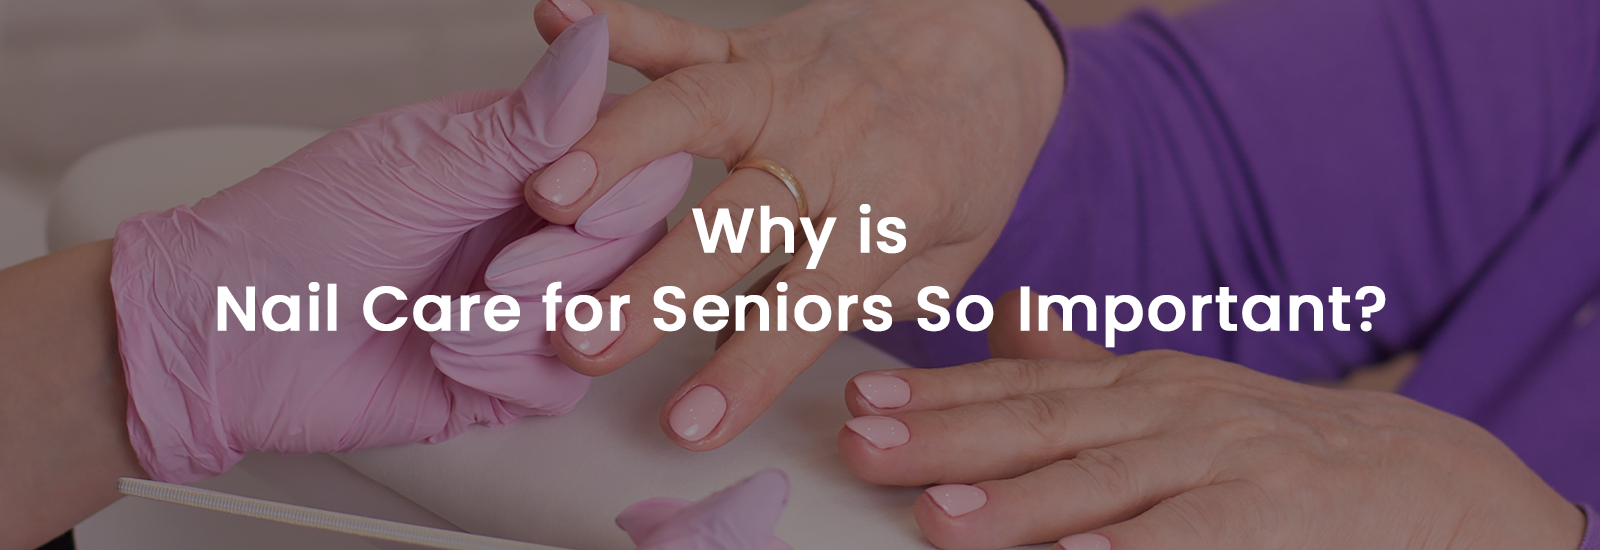 Why is Nail Care for Seniors So Important? | Banner Image